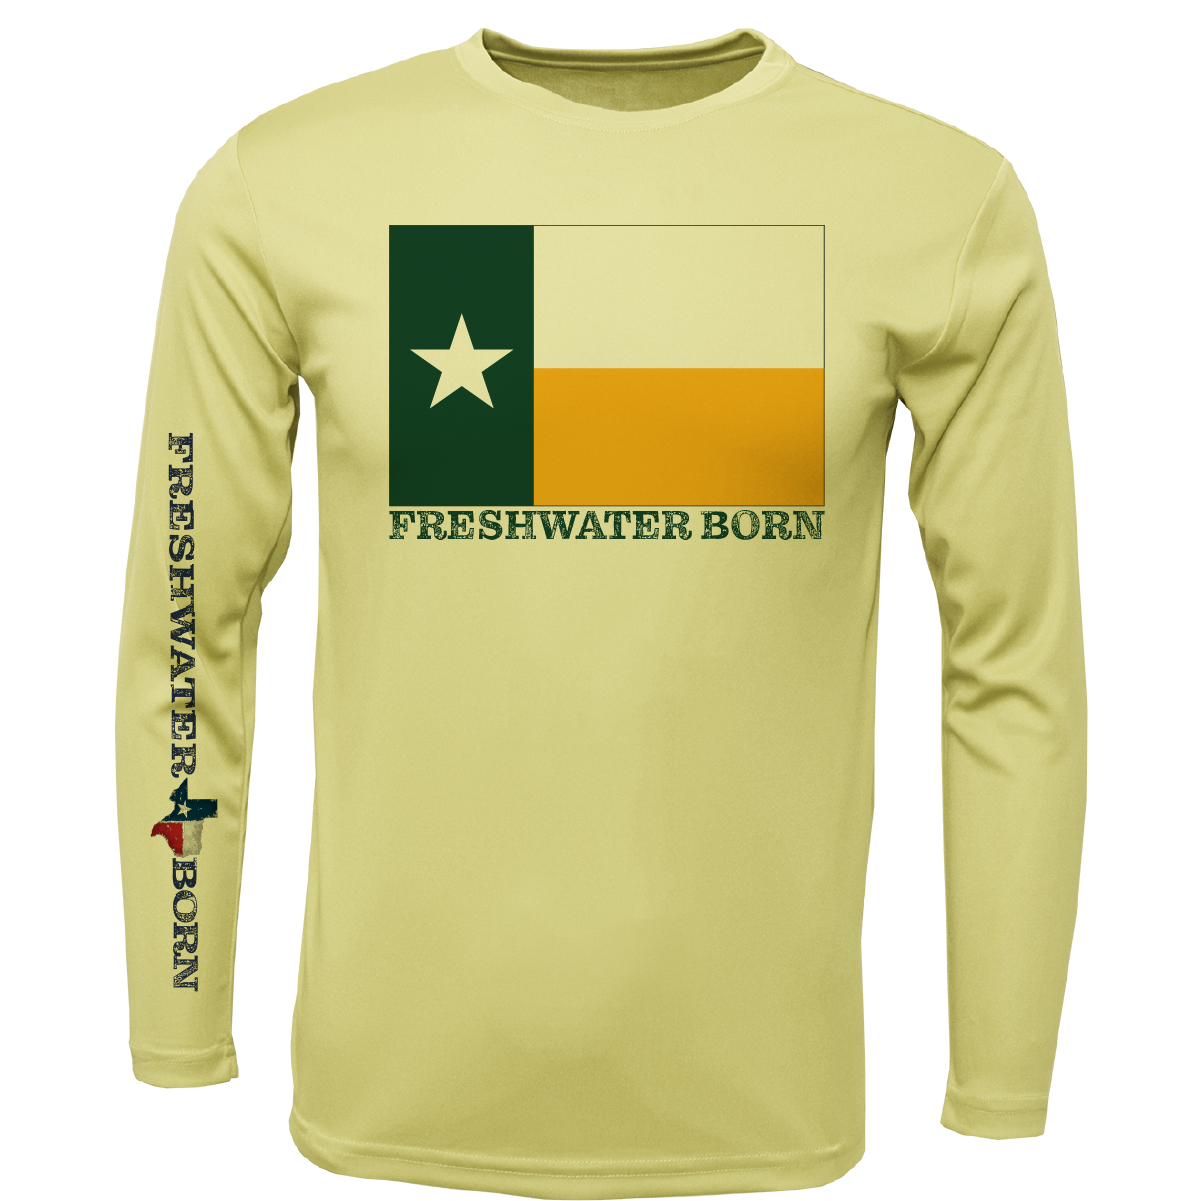 Baylor Edition Freshwater Born Girl's Long Sleeve UPF 50+ Dry-Fit Shirt